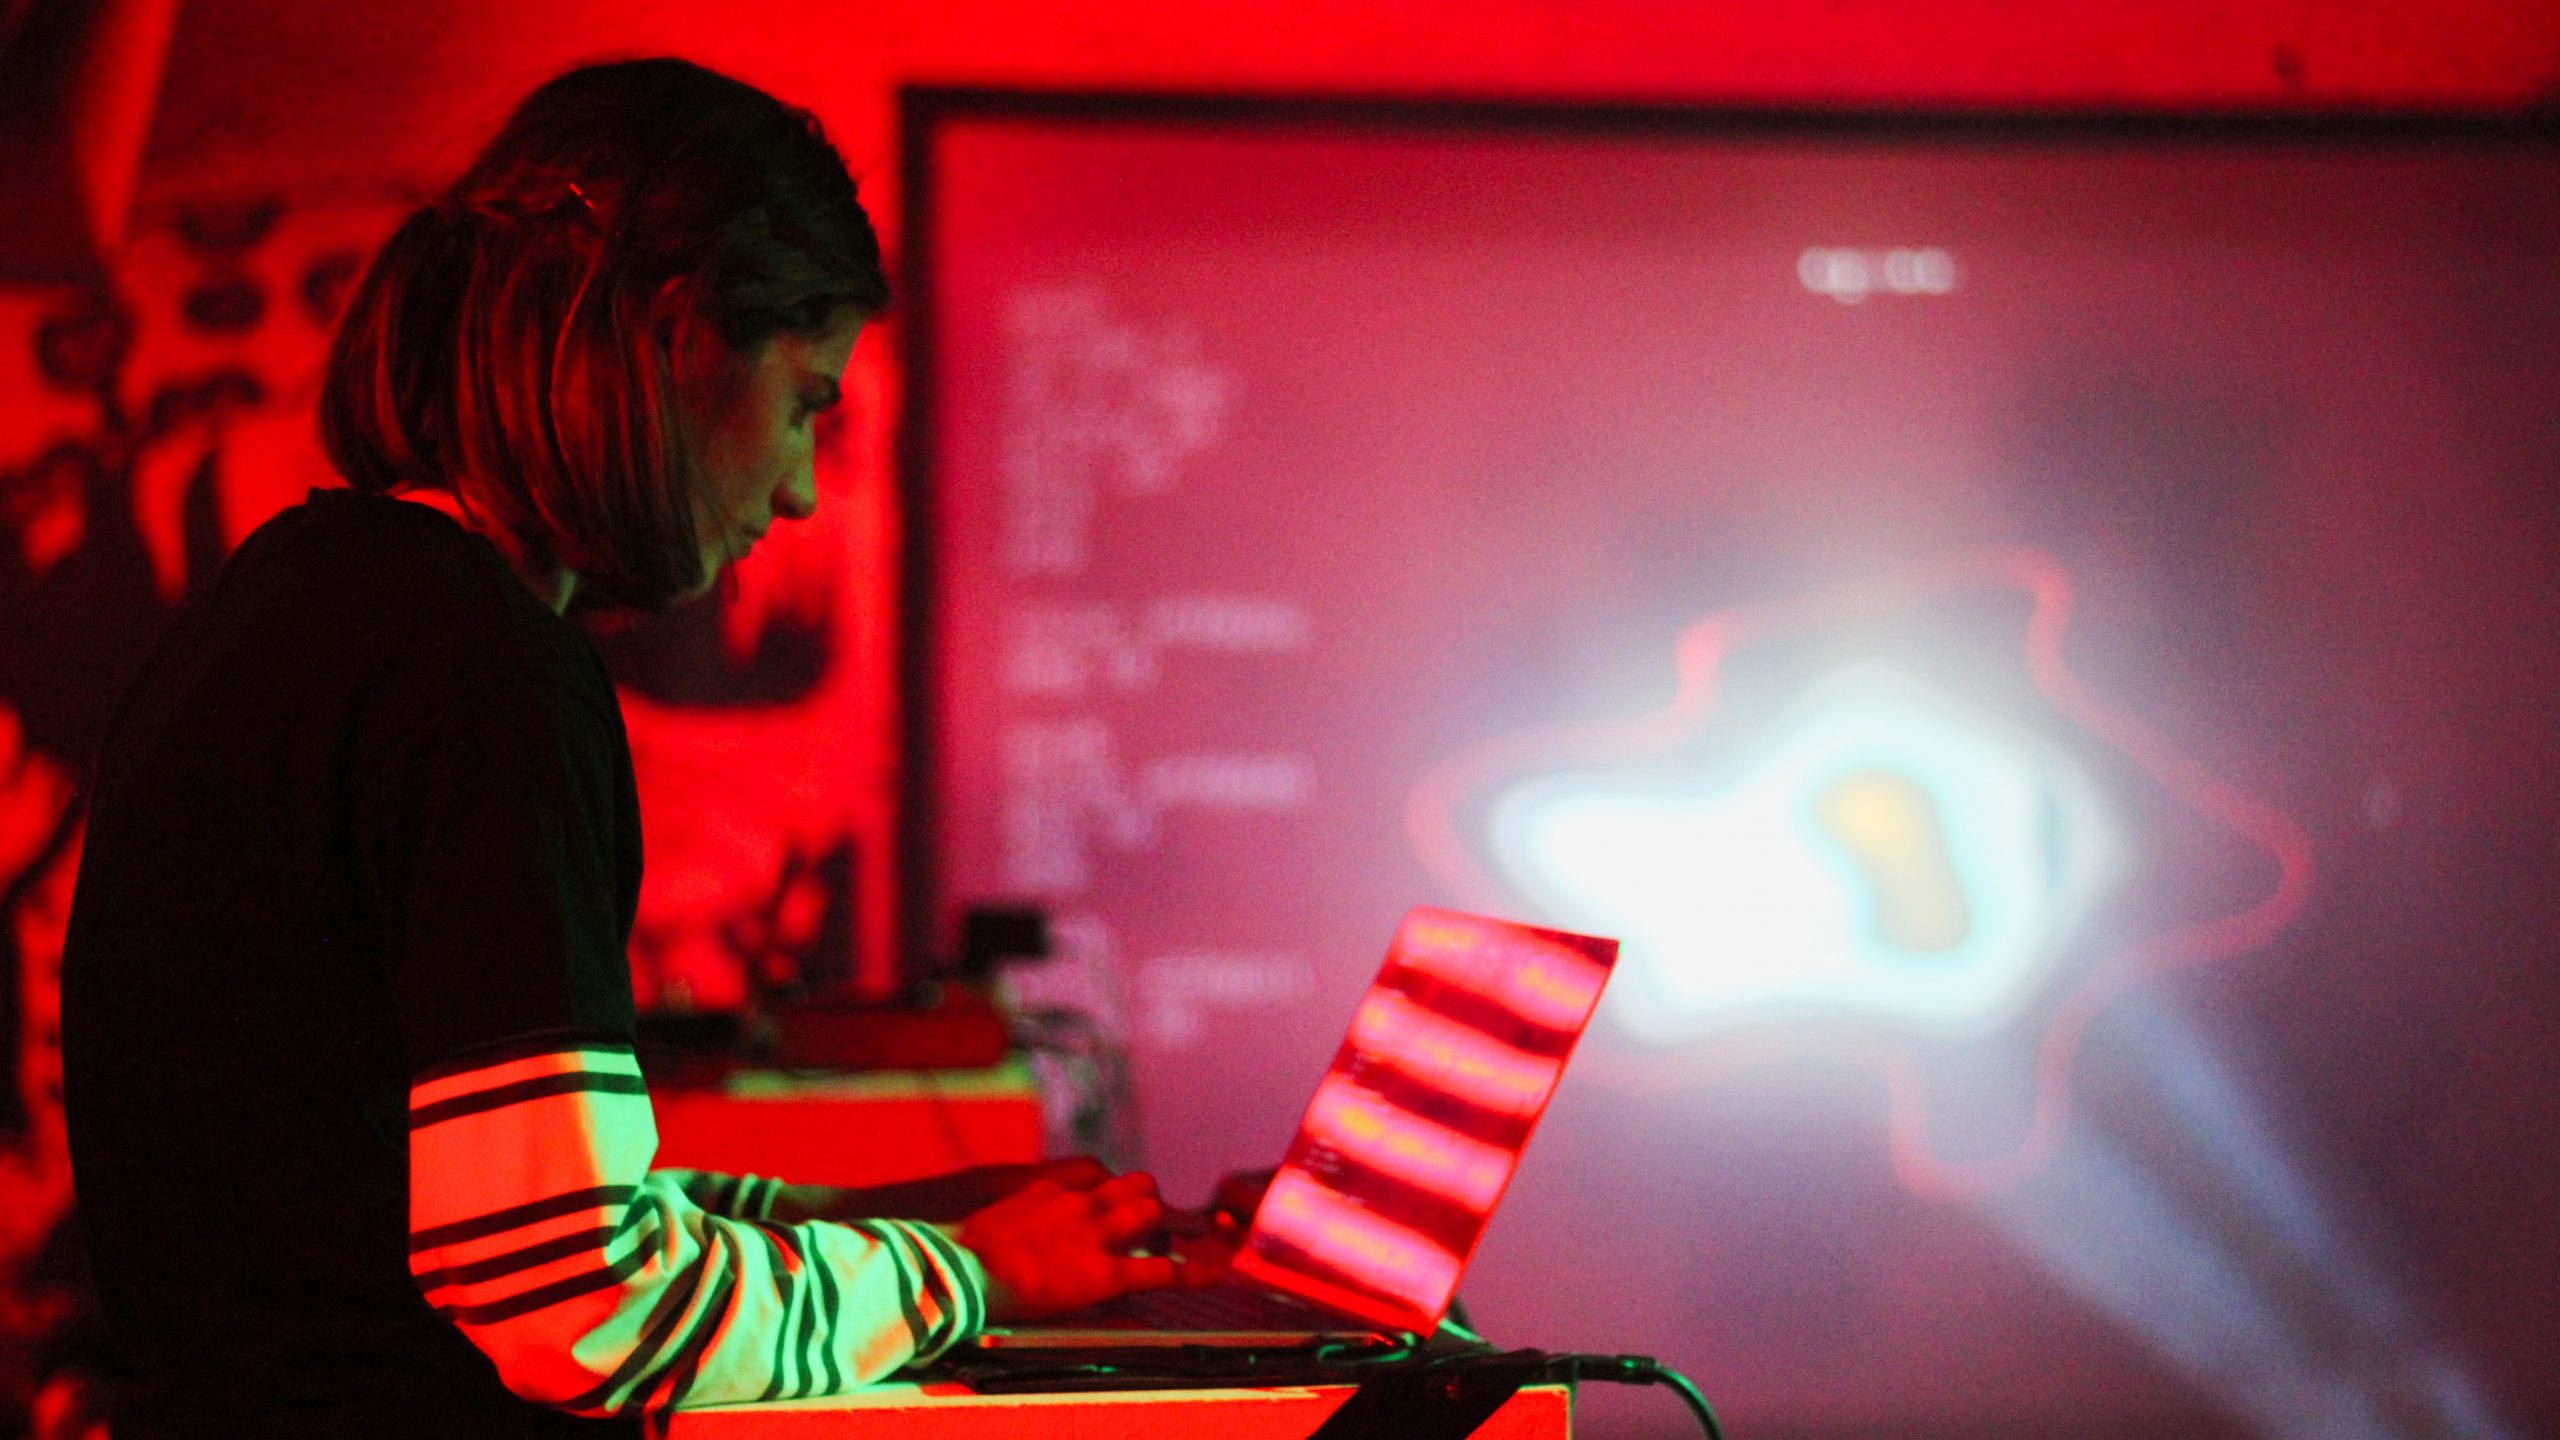 Lizzie Wilson (young woman with brown hair) live-coding on a computer